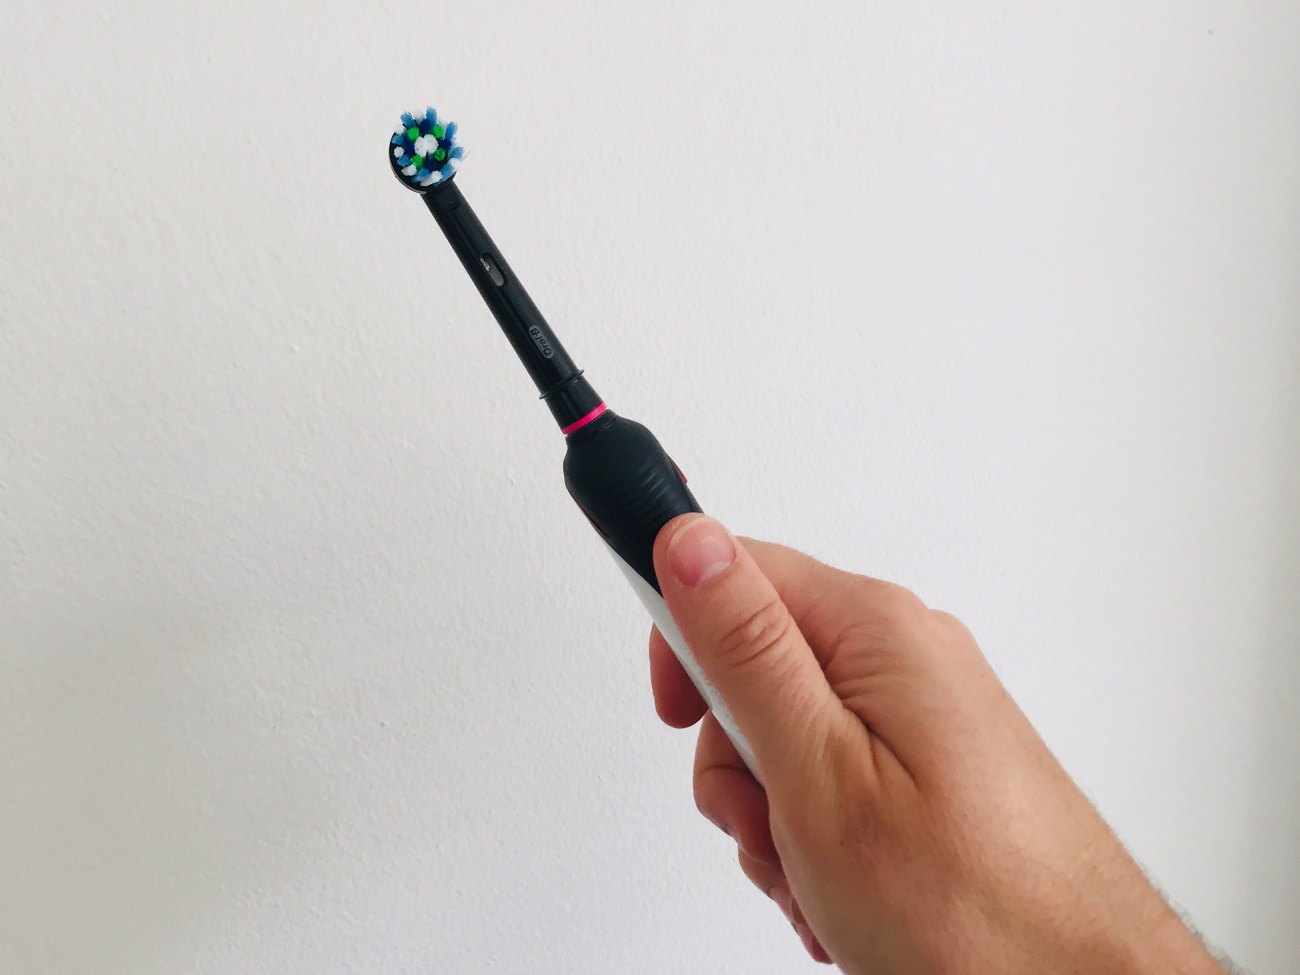 holding the Oral-b Pro 2 2000 Electric Toothbrush